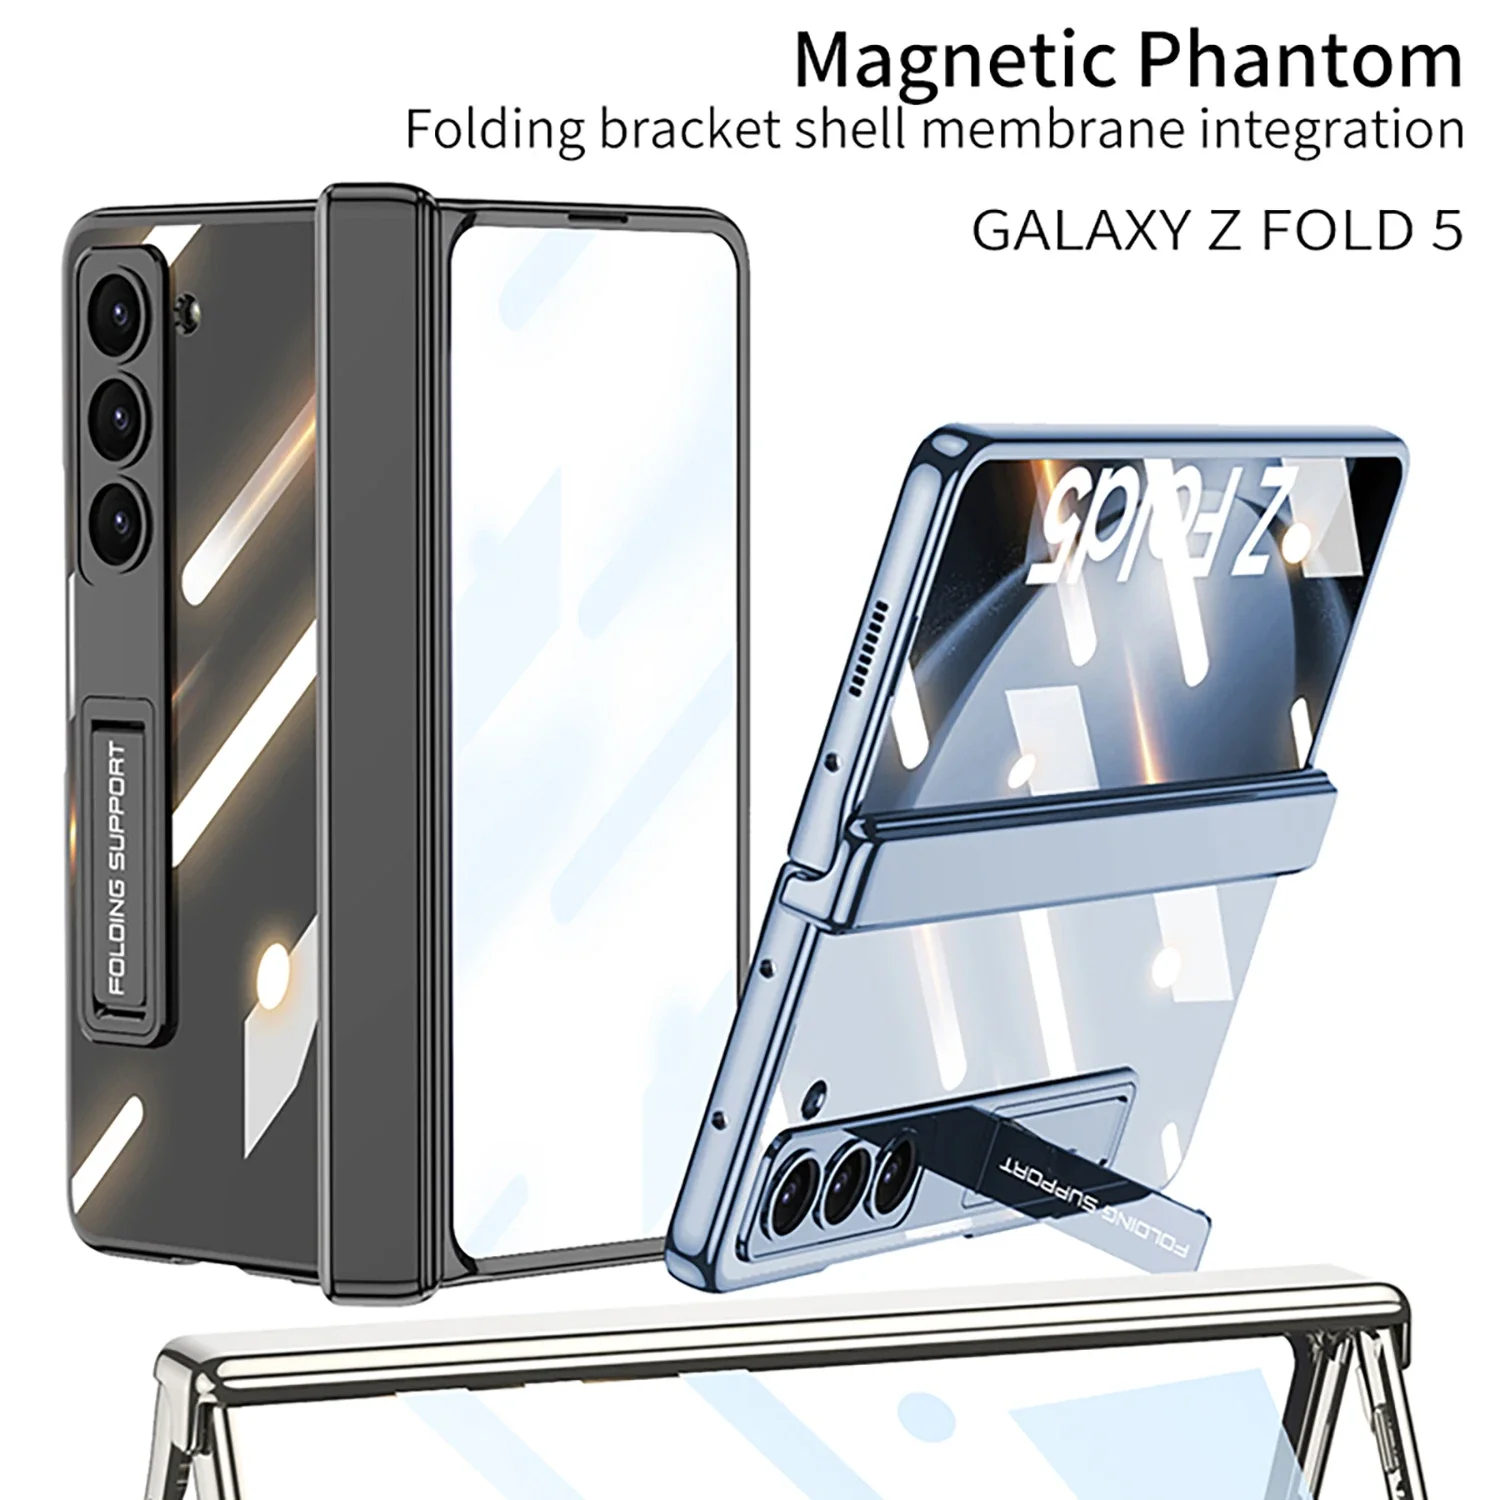 

ACC-Case For Samsung Galaxy Z Fold 5 Magnetic Phantom Comes with high-definition explosion-proof glass film phone case